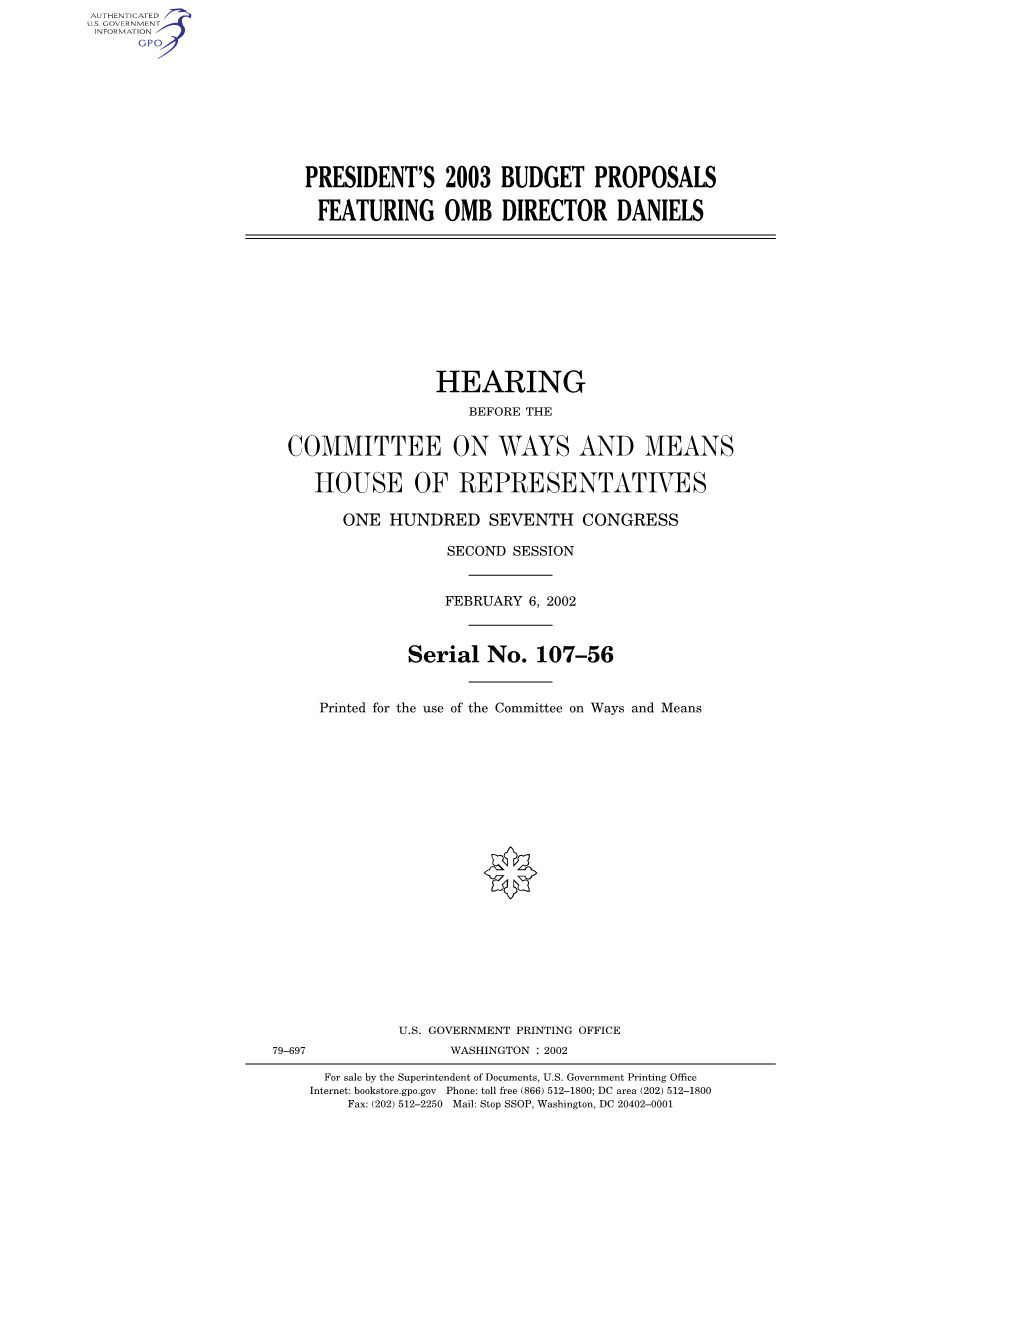 President's 2003 Budget Proposals Featuring Omb